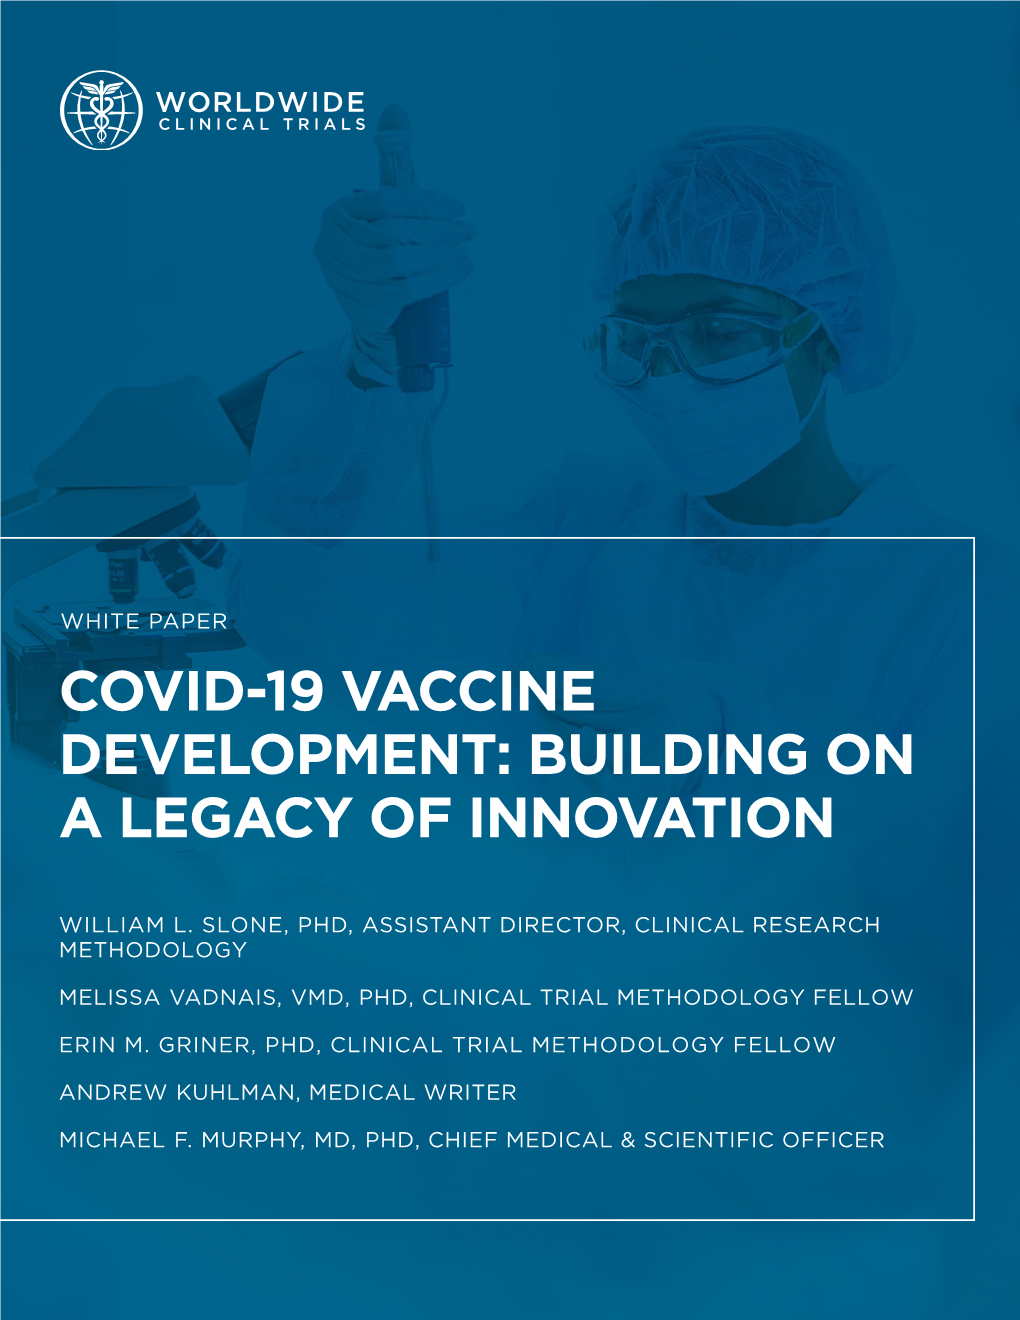 Covid-19 Vaccine Development: Building on a Legacy of Innovation